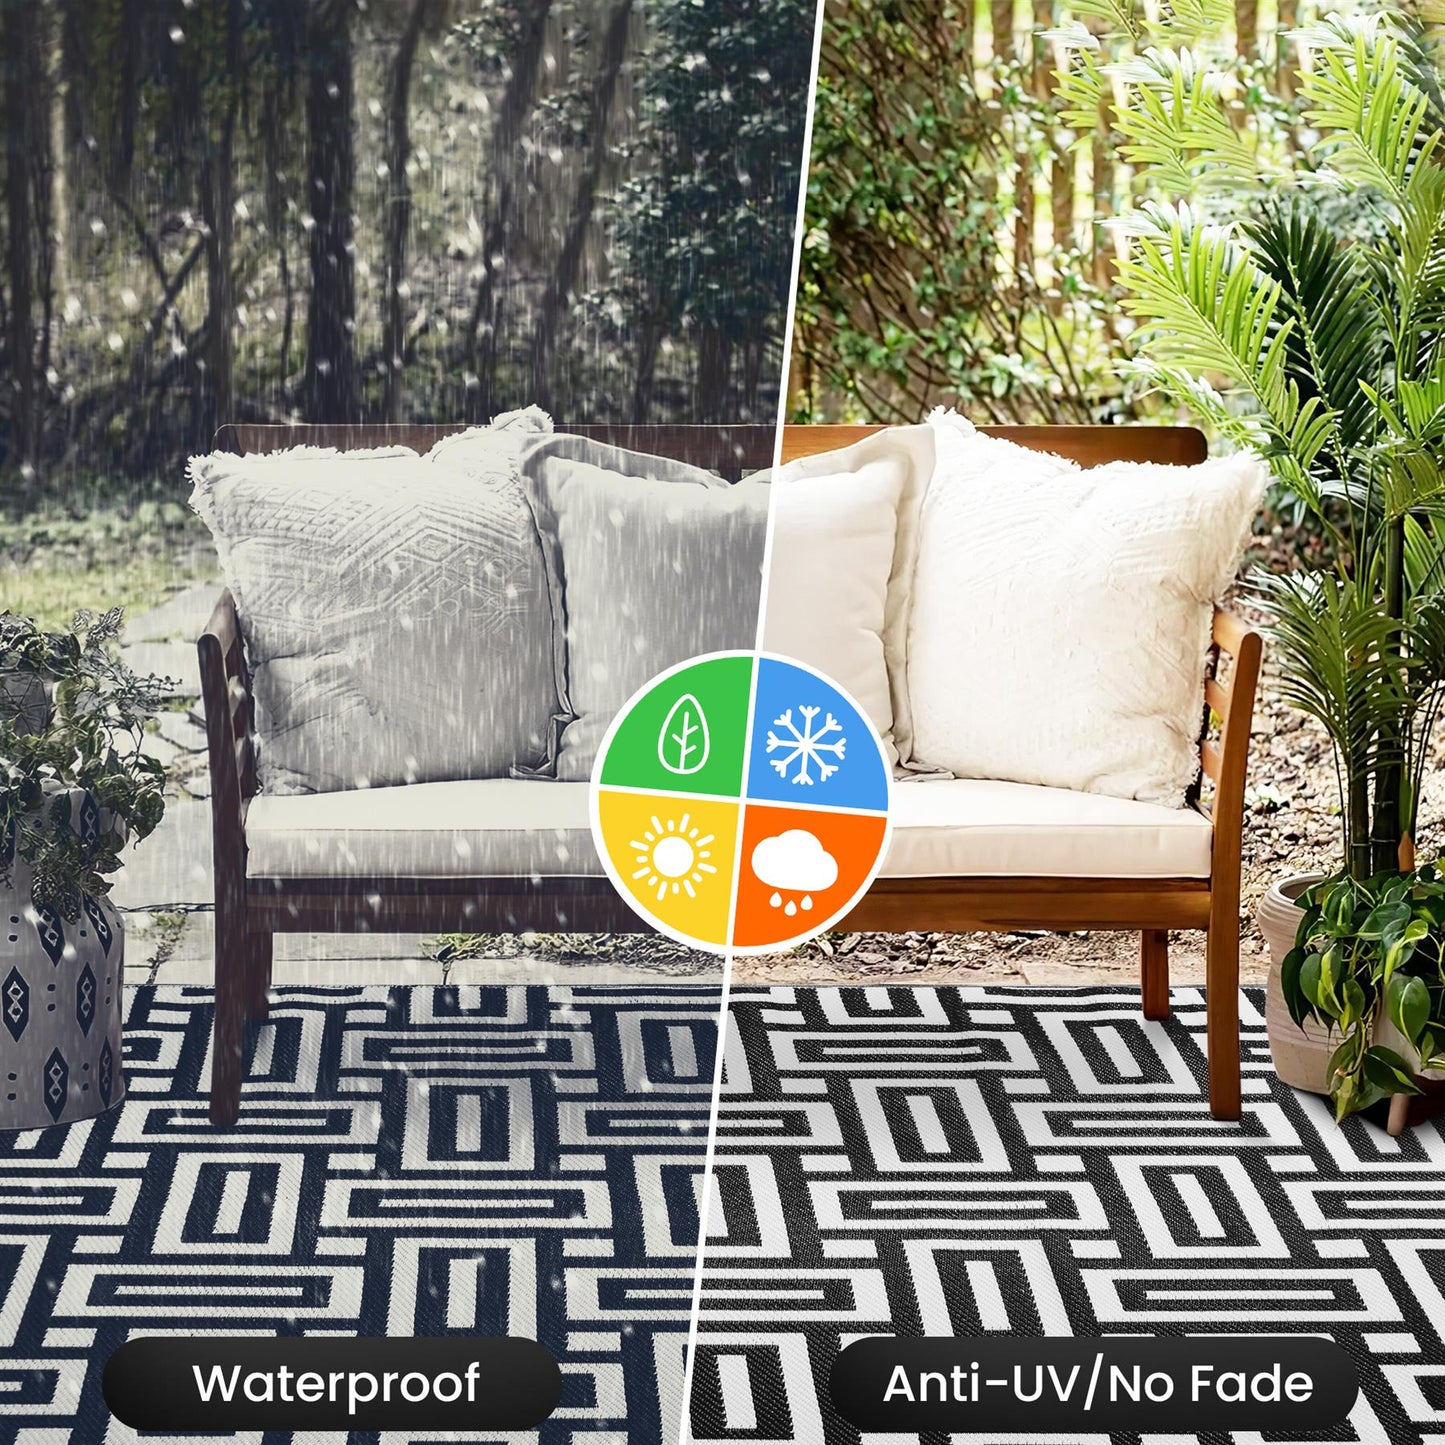 Transform Your Outdoor Space with a Large-Sized Outdoor Rug